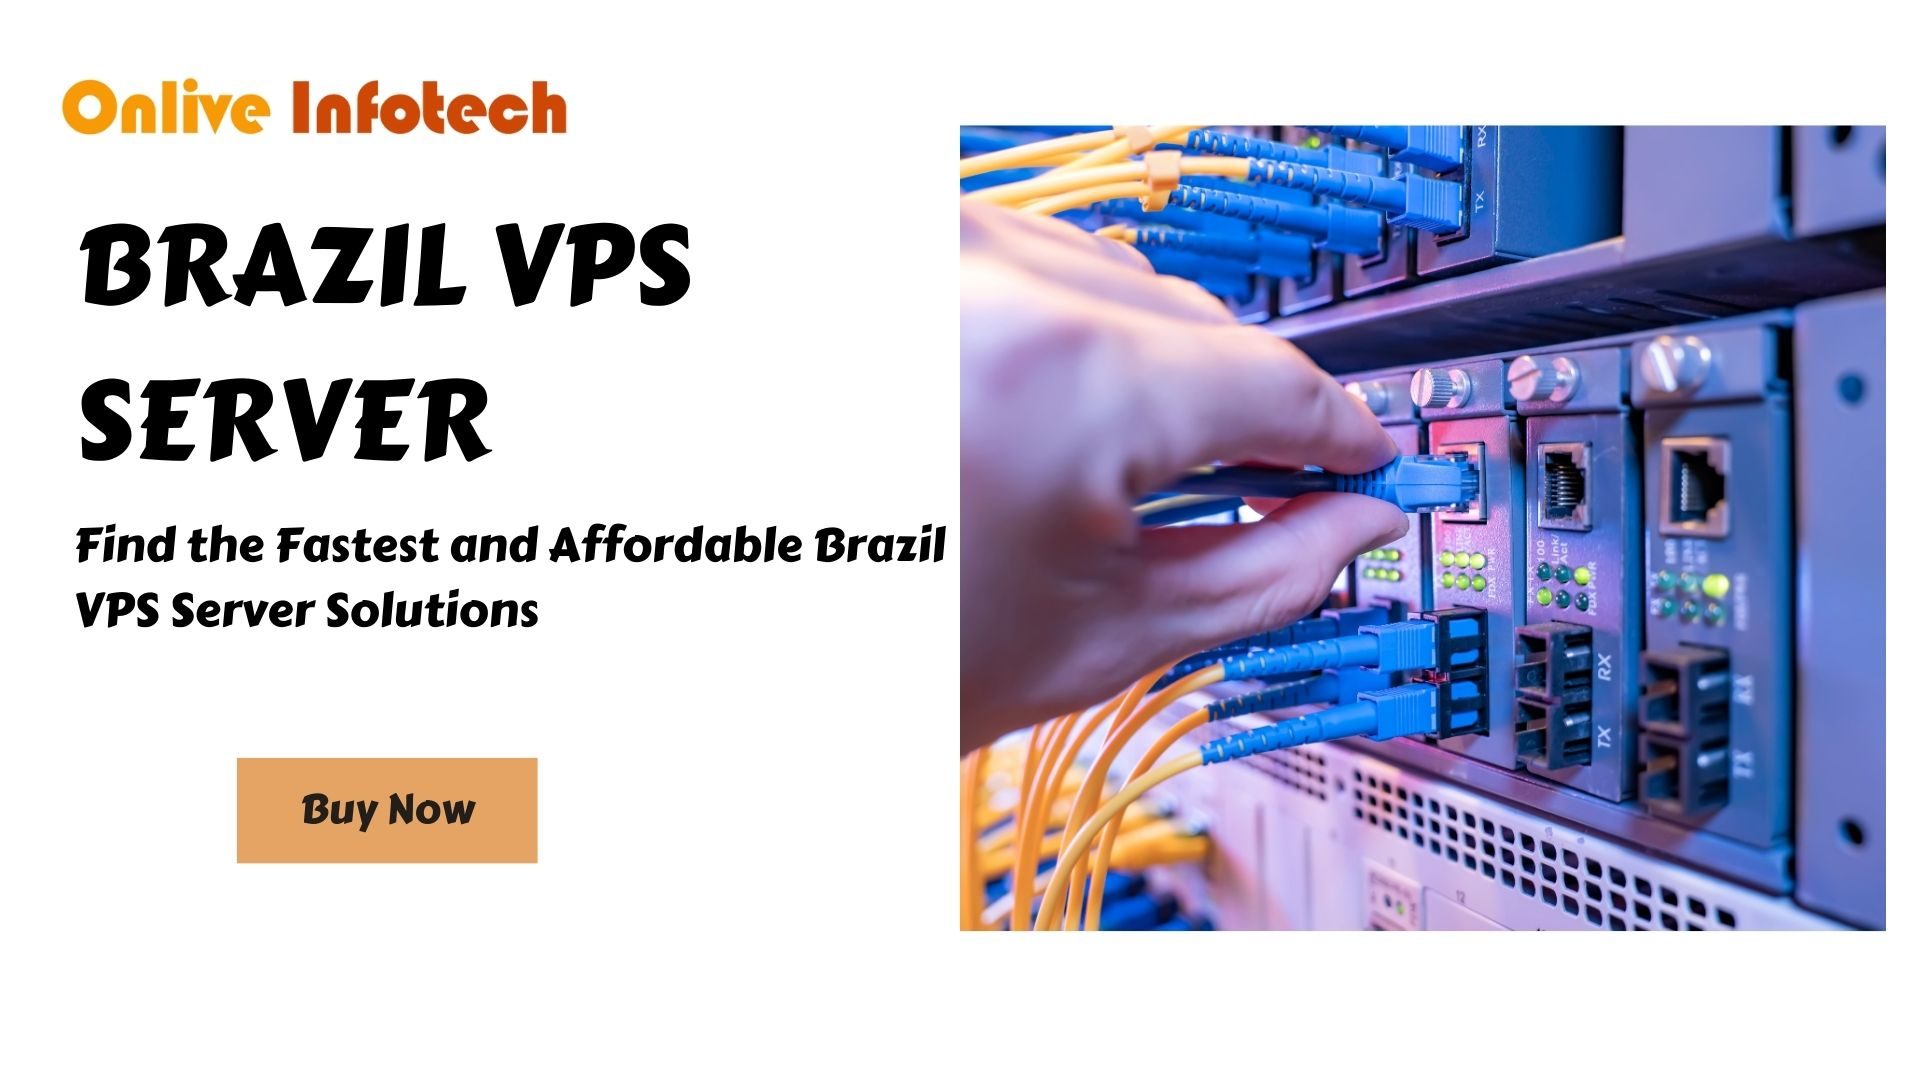 Find the Fastest and Affordable Brazil VPS Server Solutions